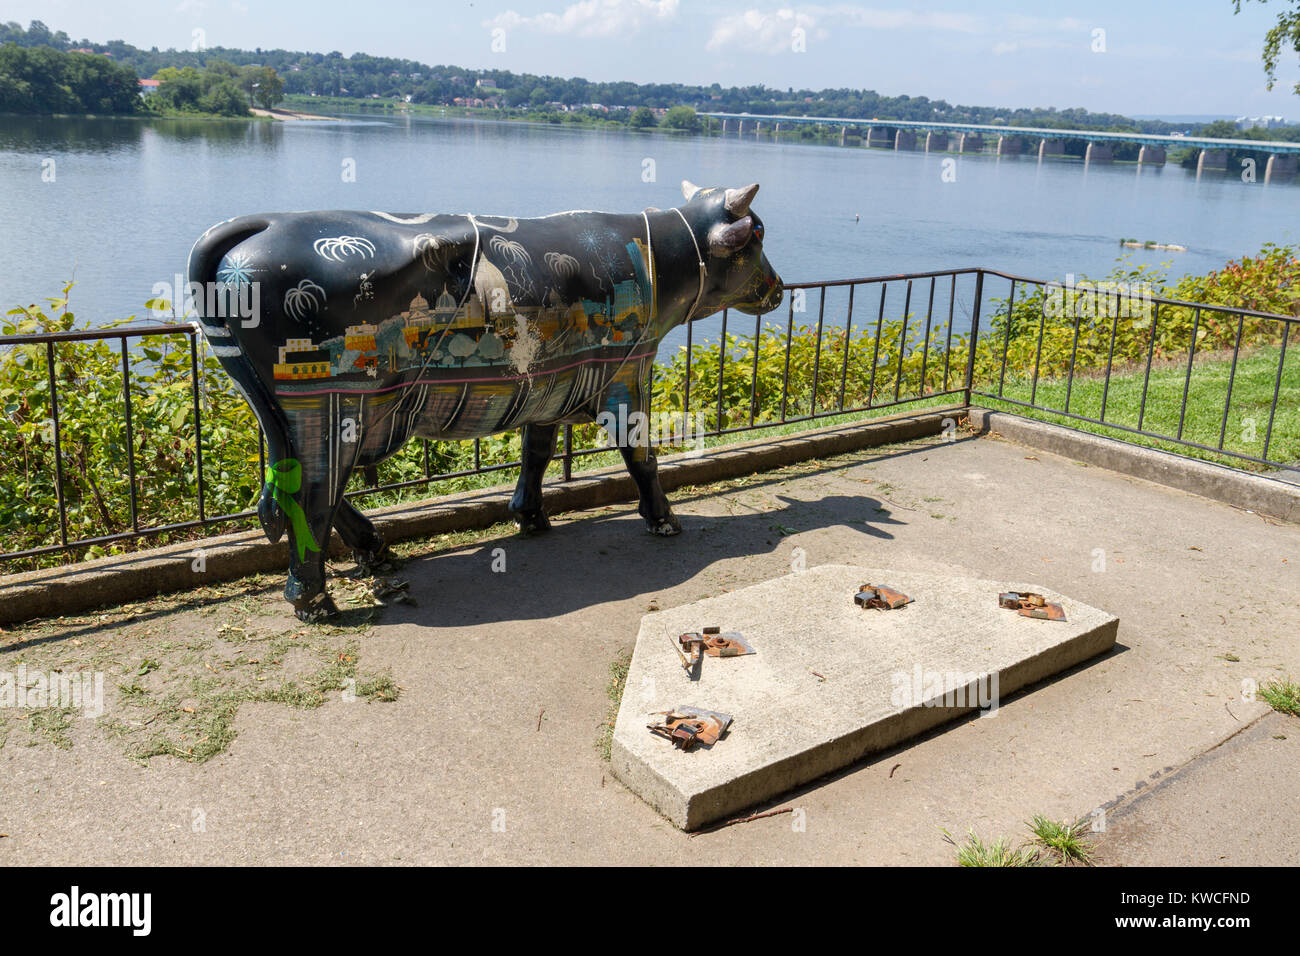 A displaced cow model ('The 'burg Celebrates'), part of the CowParade Harrisburg project, on the edge of Susquehanna River, Harrisburg, PA, USA. Stock Photo